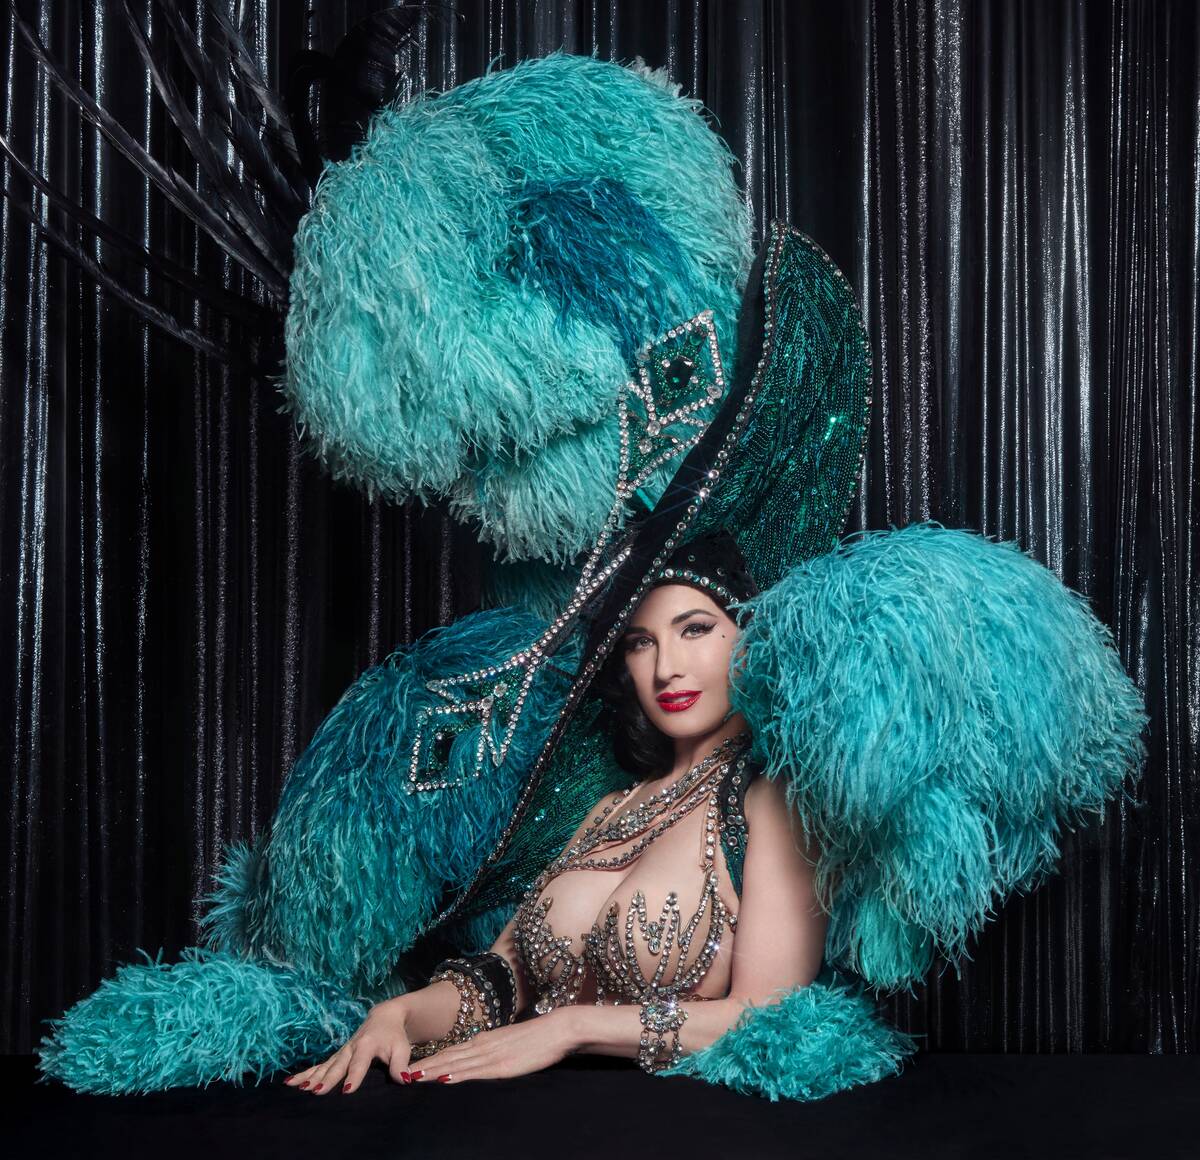 Burlesque performers from Circusperformers.co.uk